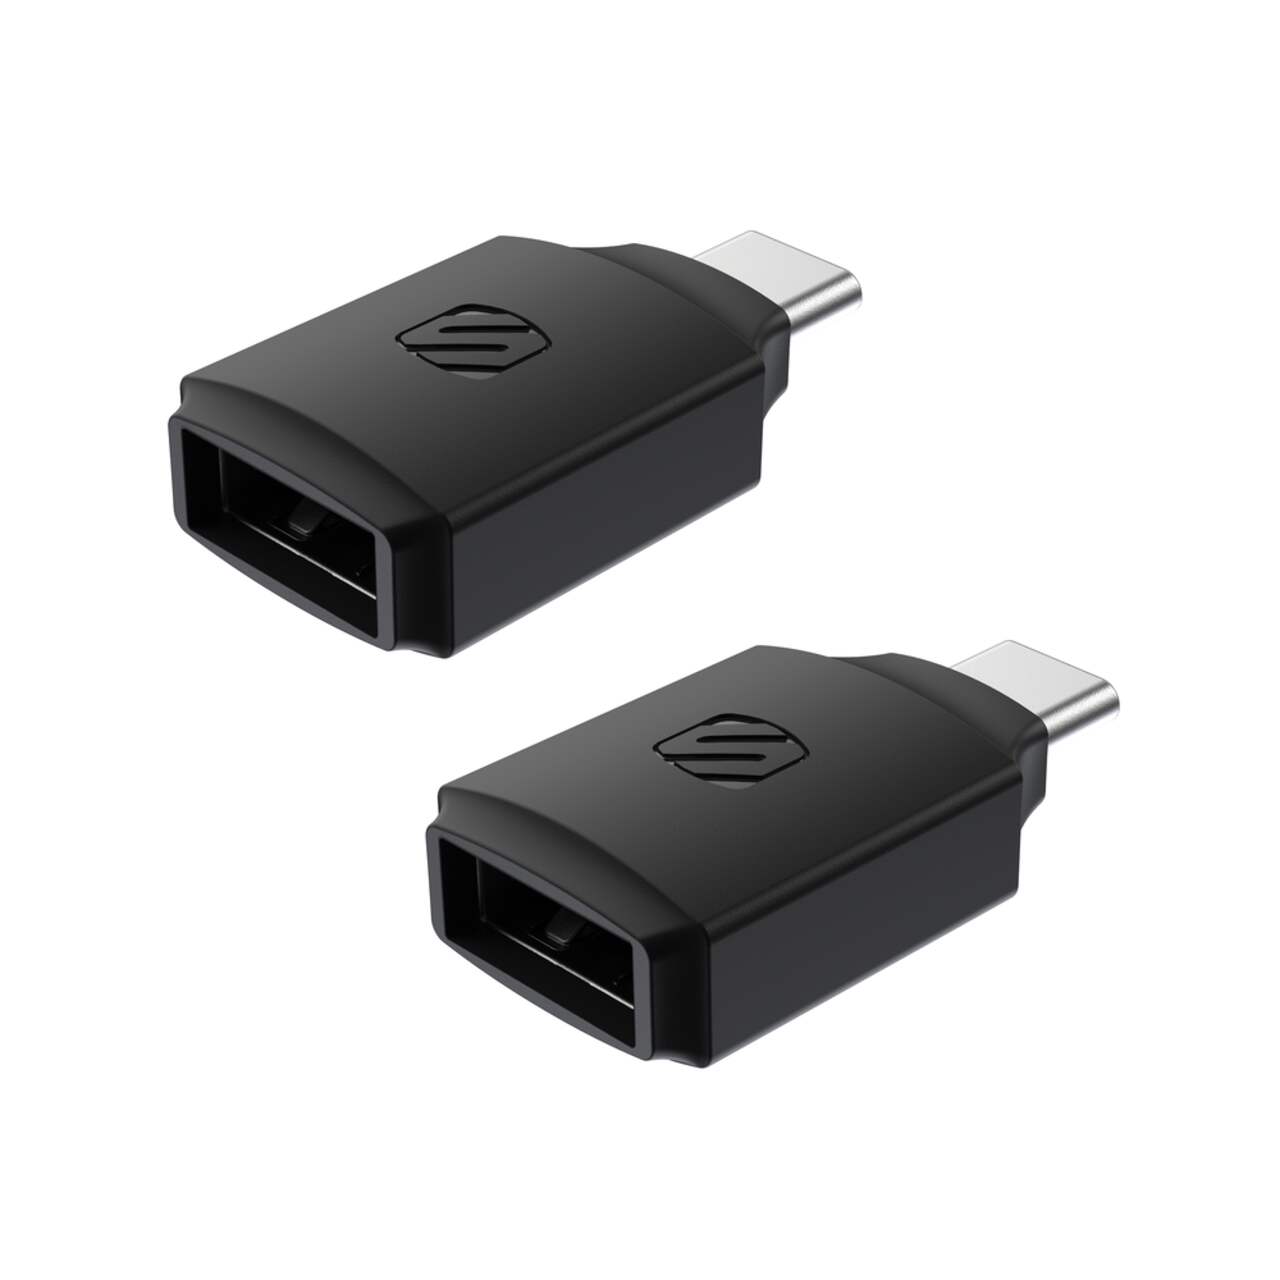 https://media-www.canadiantire.ca/product/automotive/car-care-accessories/auto-electronics/0358076/scosche-usb-c-to-usb-a-adapter-2-pack-773043b0-0a06-46a4-82a4-dba748a9da7c.png?imdensity=1&imwidth=640&impolicy=mZoom